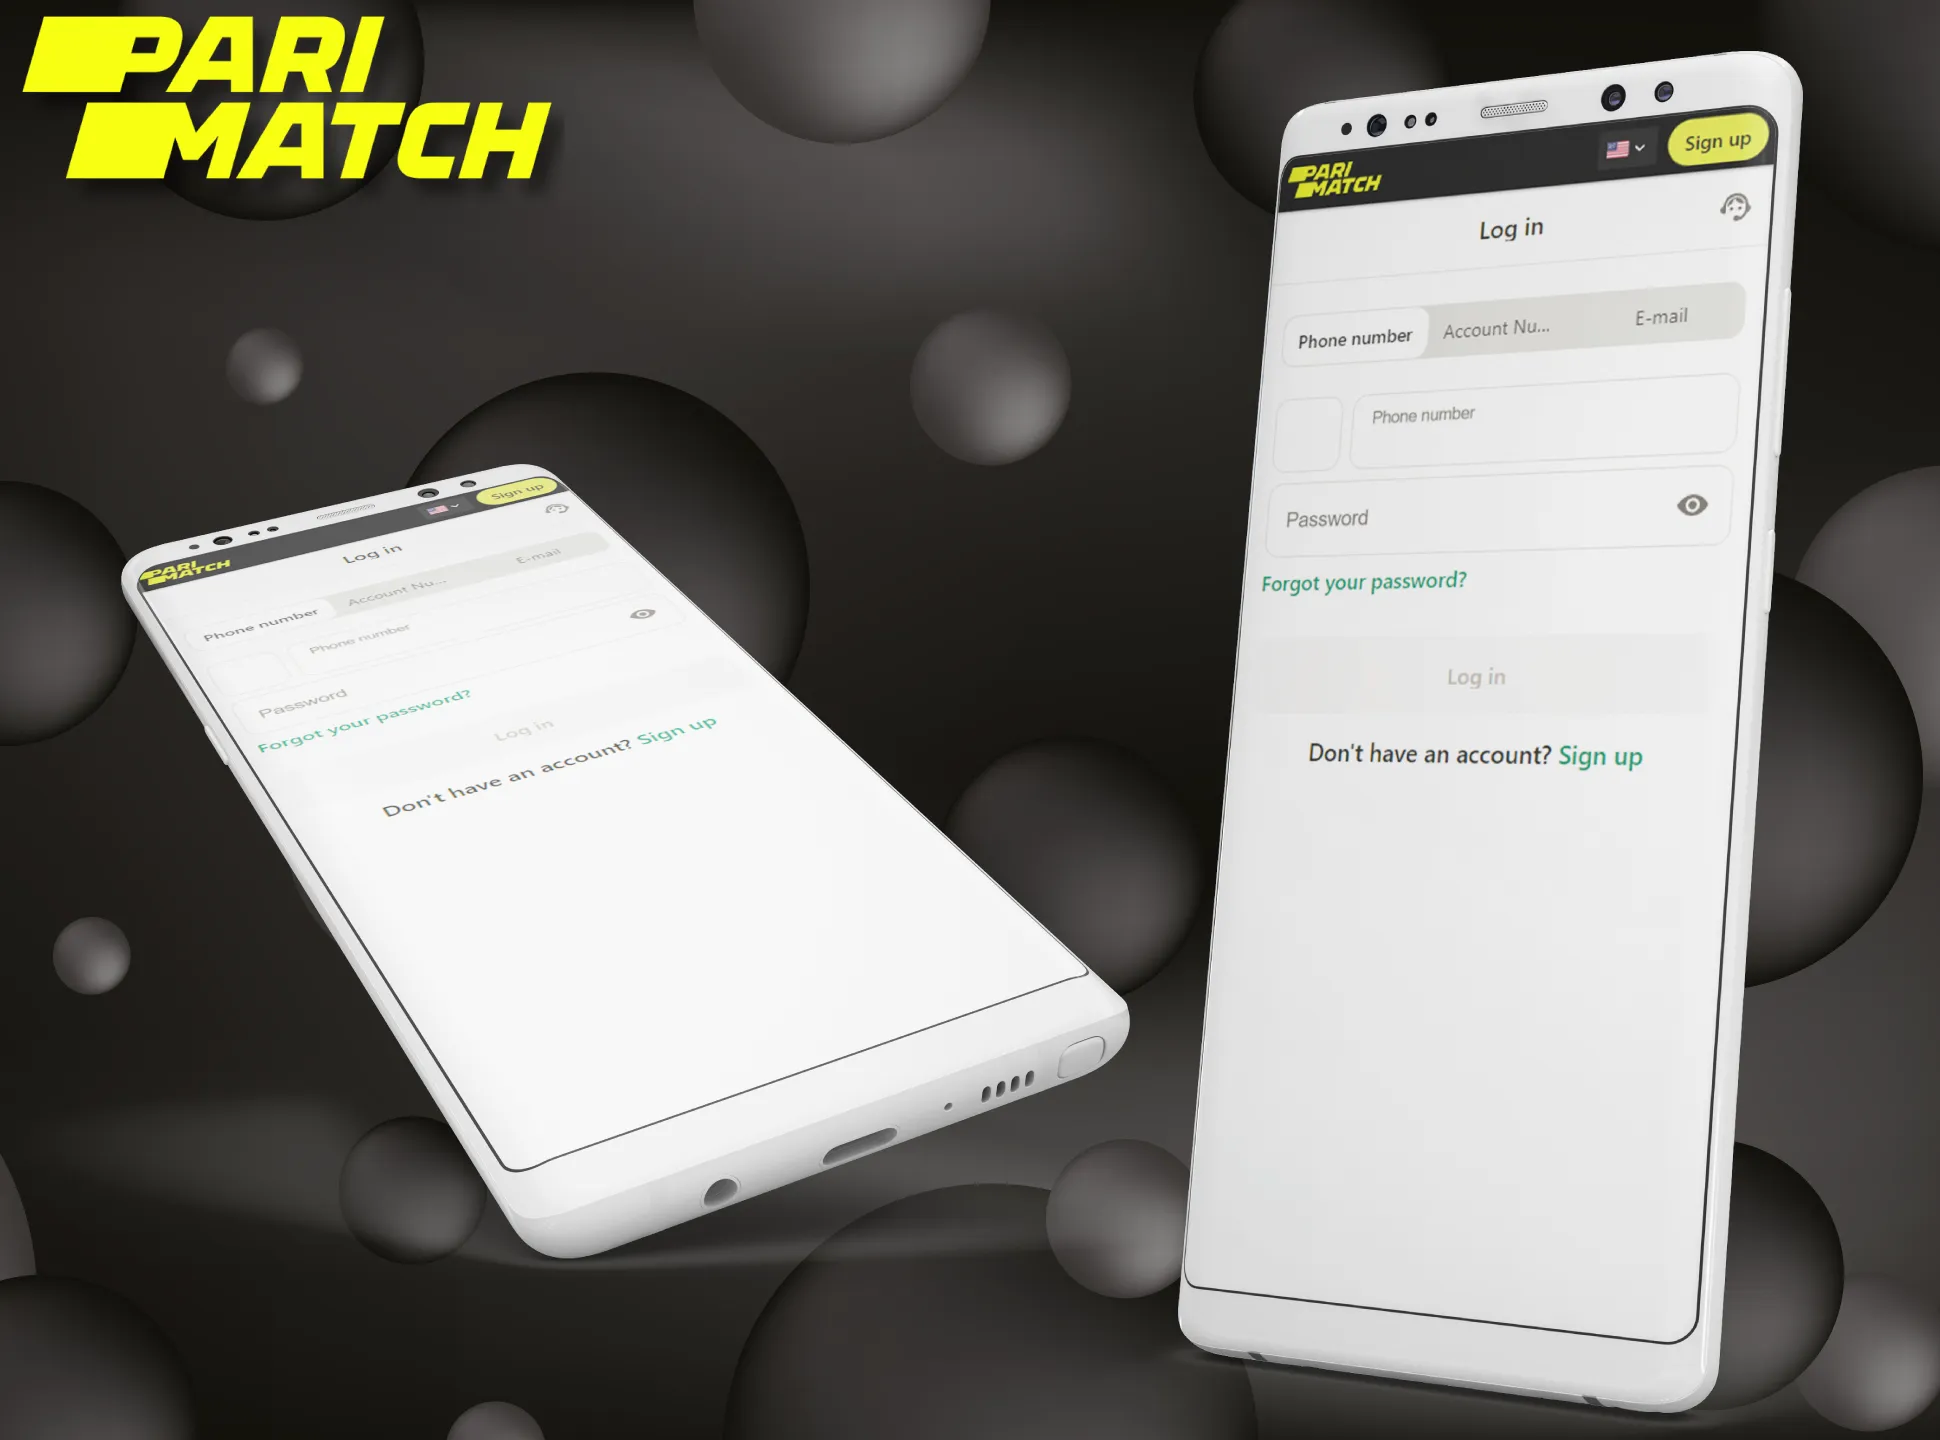 Use your username and password to log in to your Parimatch account.